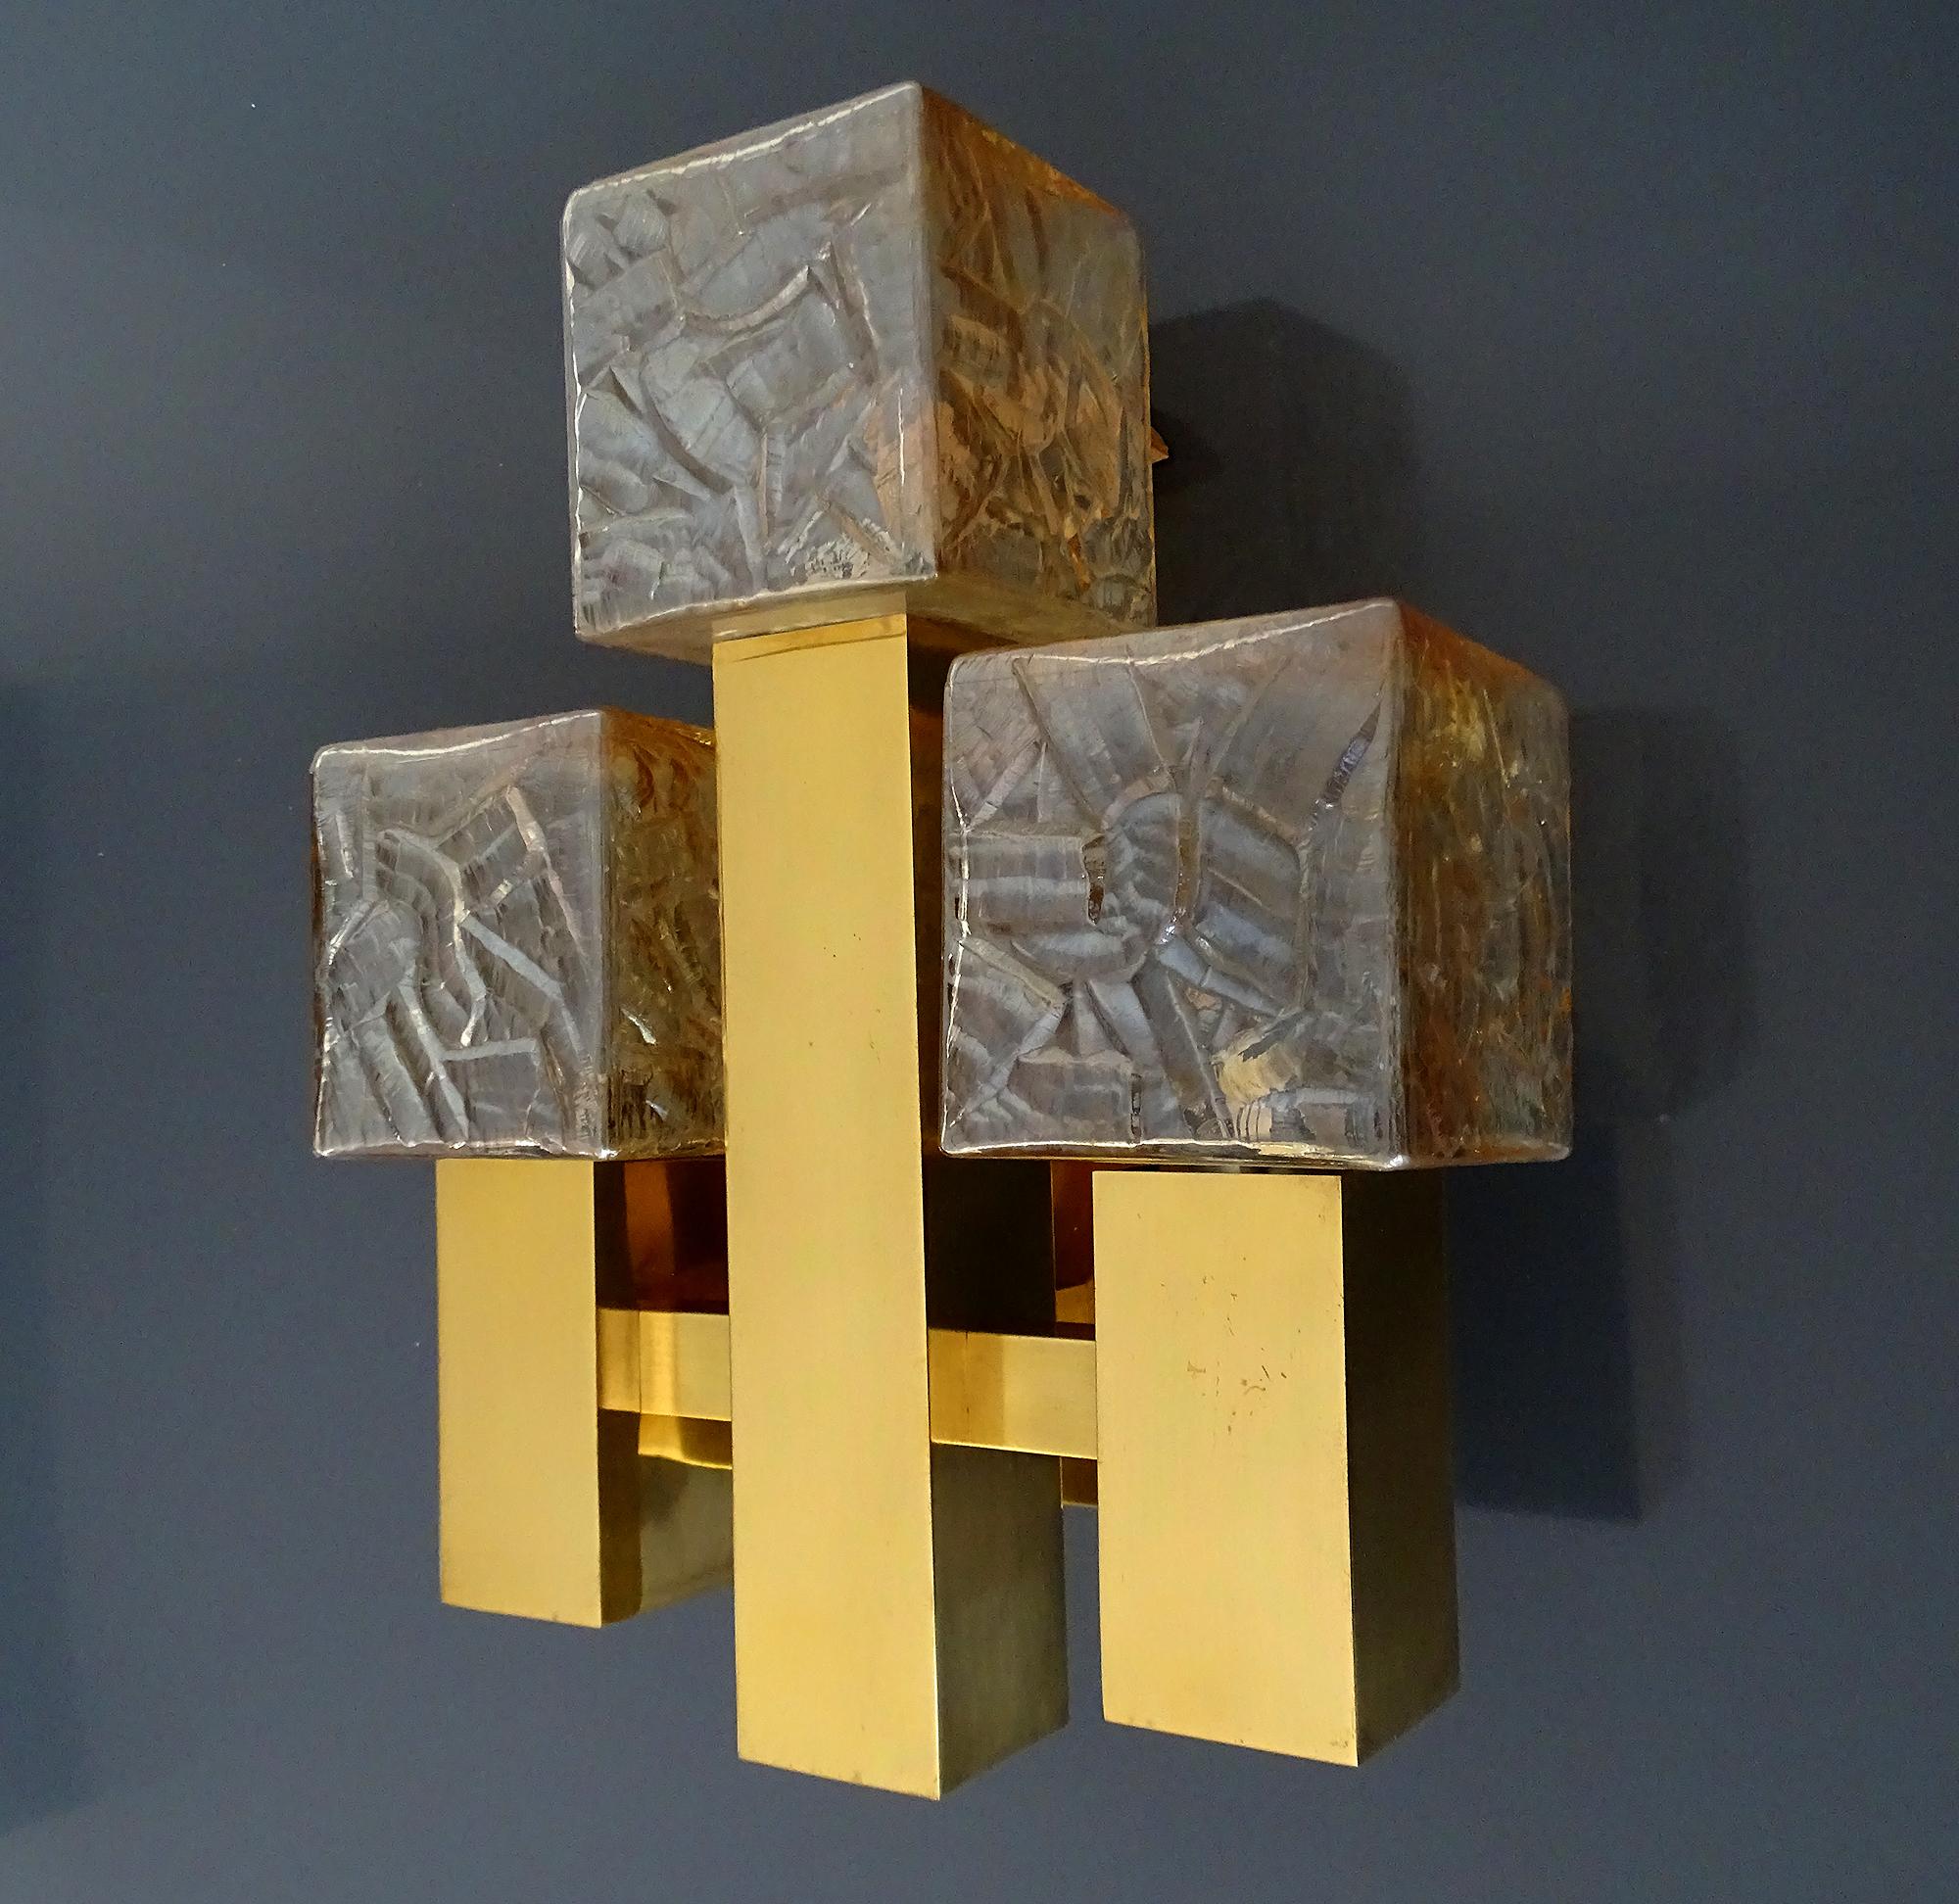 Large Kalmar sconce, featuring 3 structured cubic glass shades with a light amber tint, cruciform brass structure 
Dimensions:
H 14.18 in. x W 11.42 in. x D 5.32 in.
H 36 cm x W 29 cm x D 13.5 cm
Three candelabra size bulbs 40 watts.